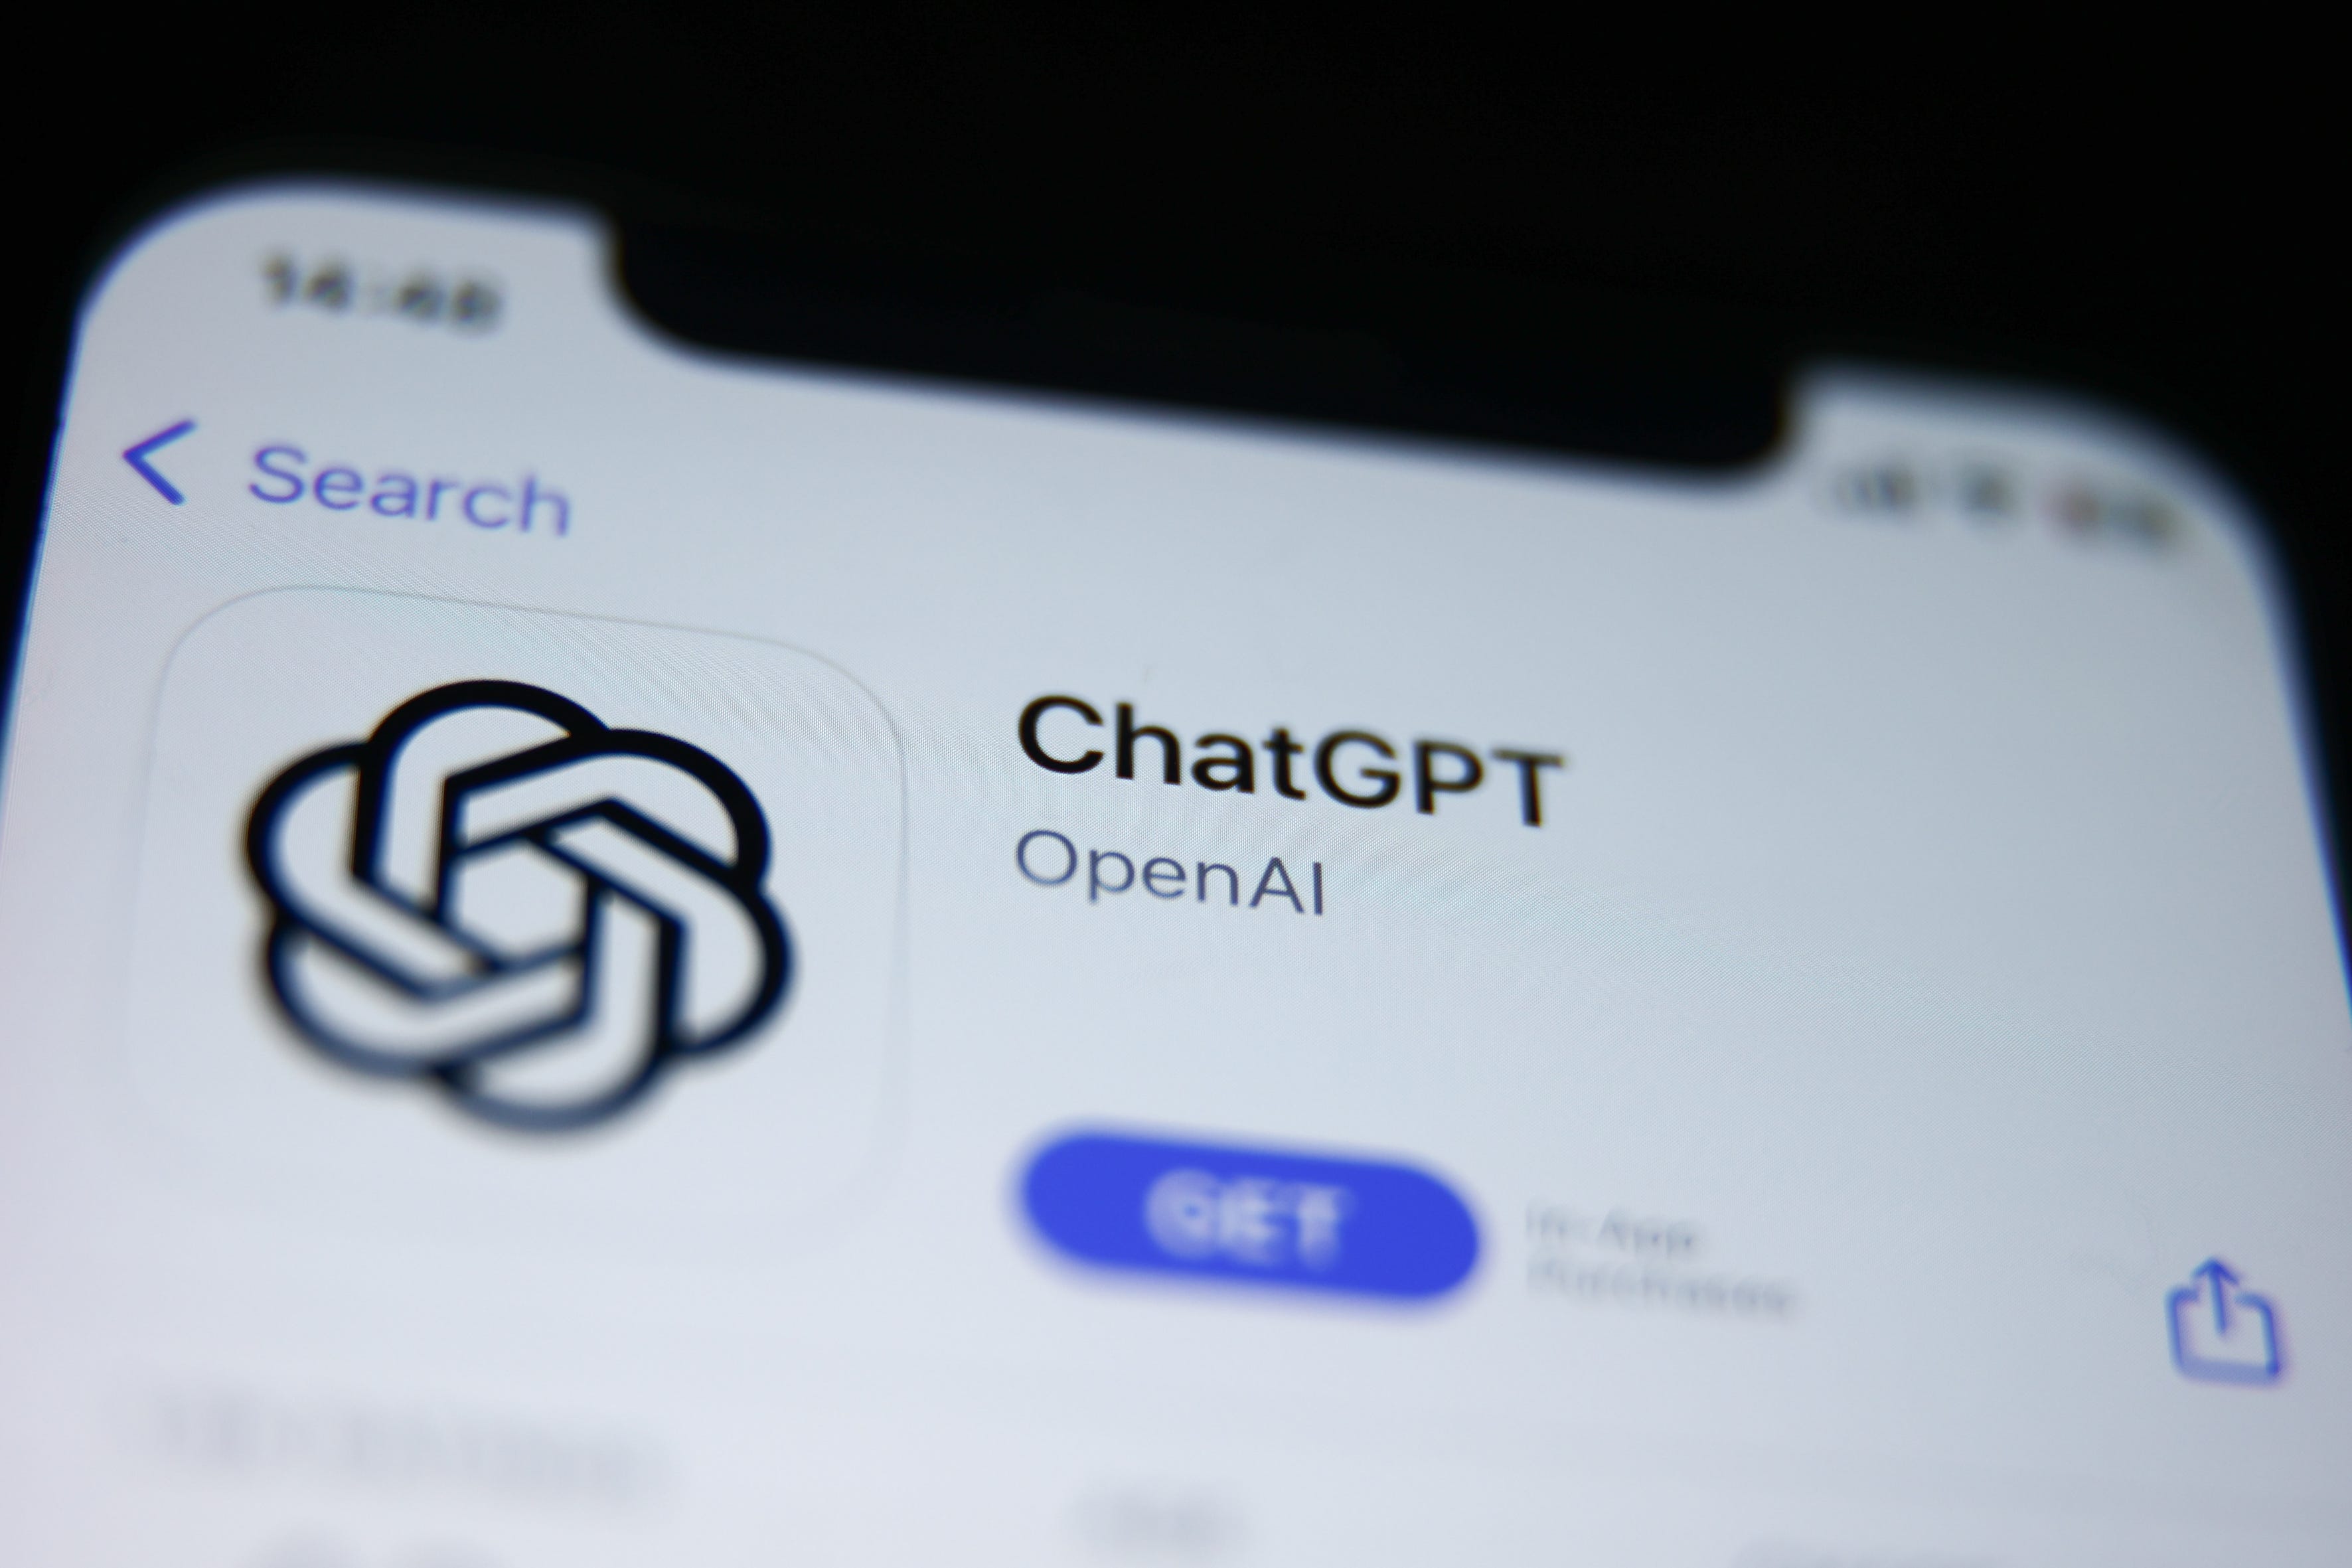 What You Need to Know About ChatGPT's Latest Updates